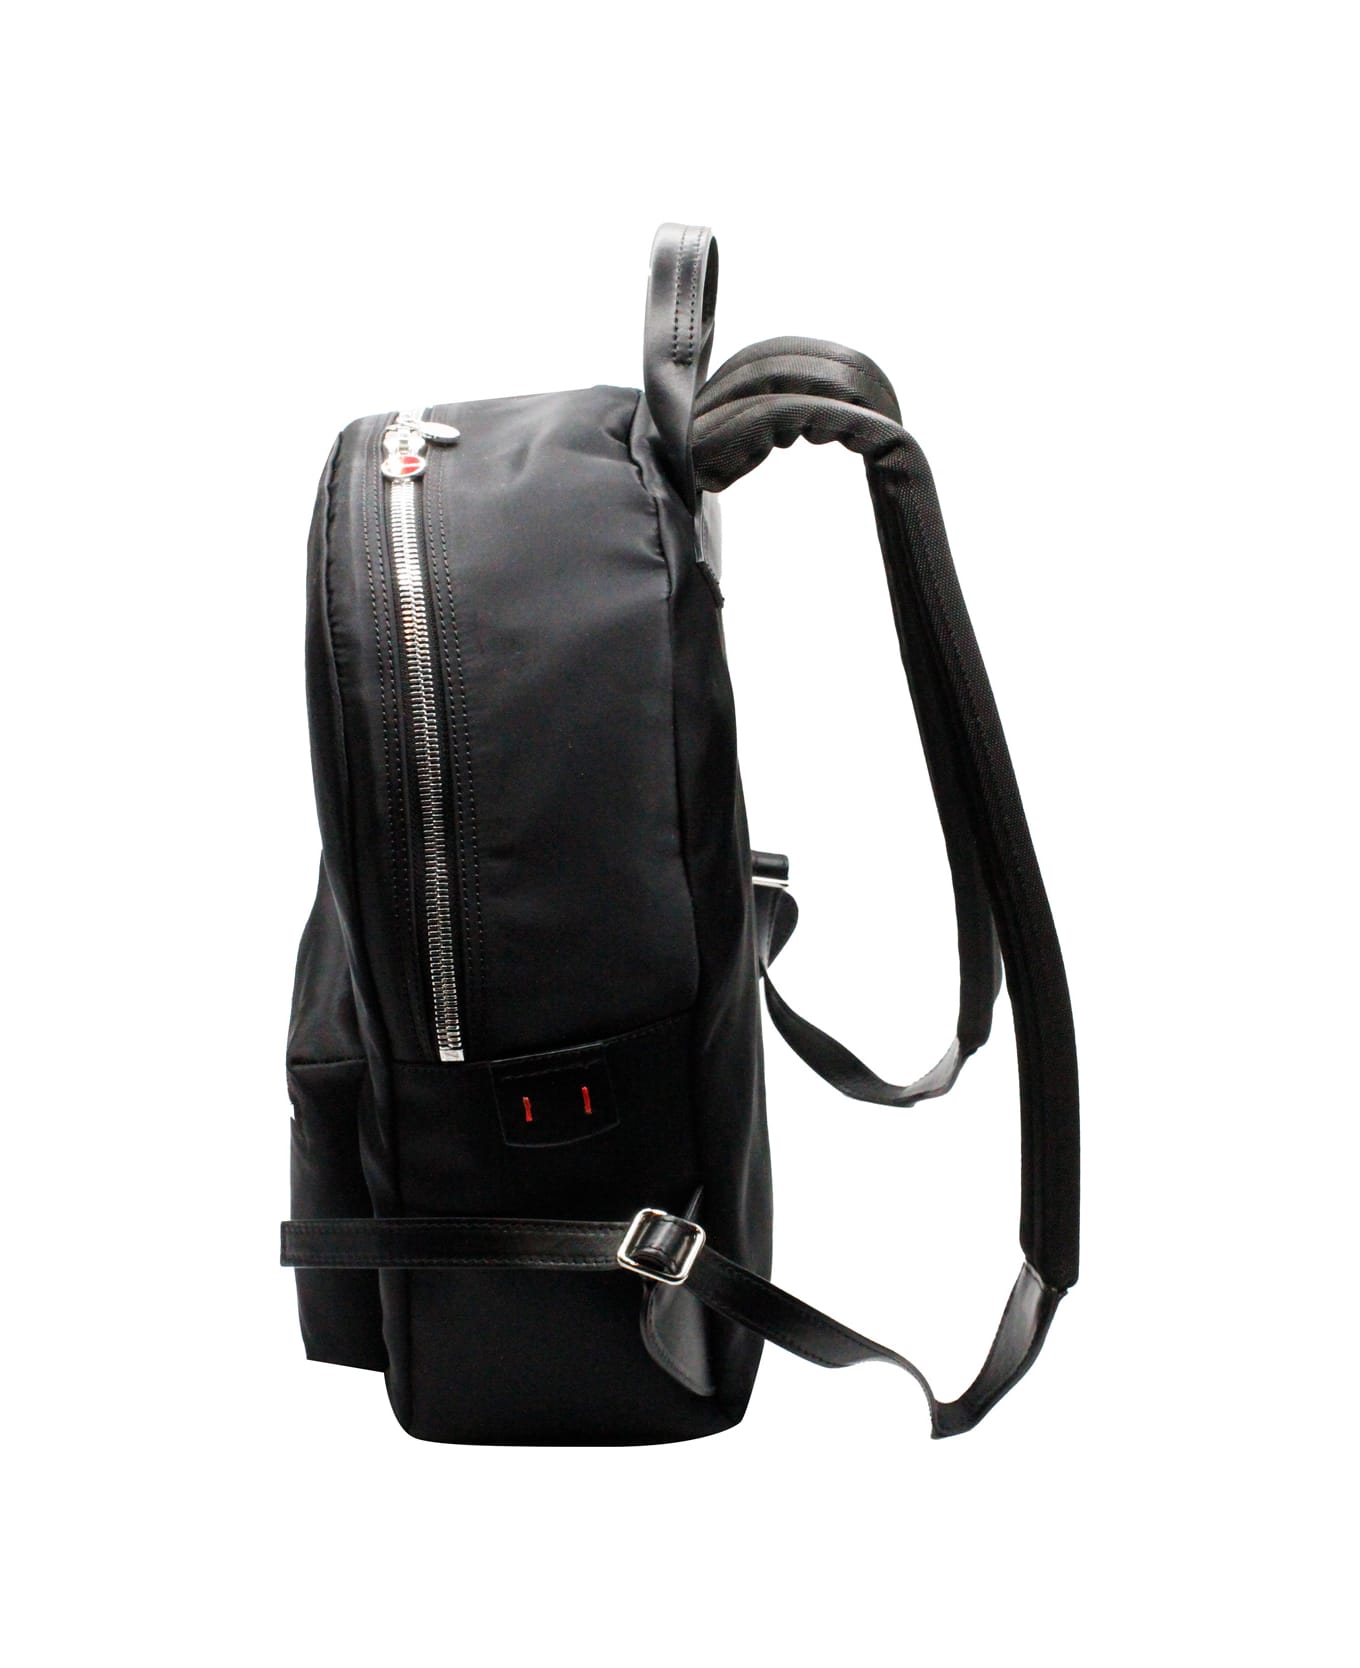 Kiton Backpack In Technical Fabric With Leather Inserts And Adjustable Shoulder Straps. Logo On The Front Pocket 40x33x15 Cm - Black バックパック